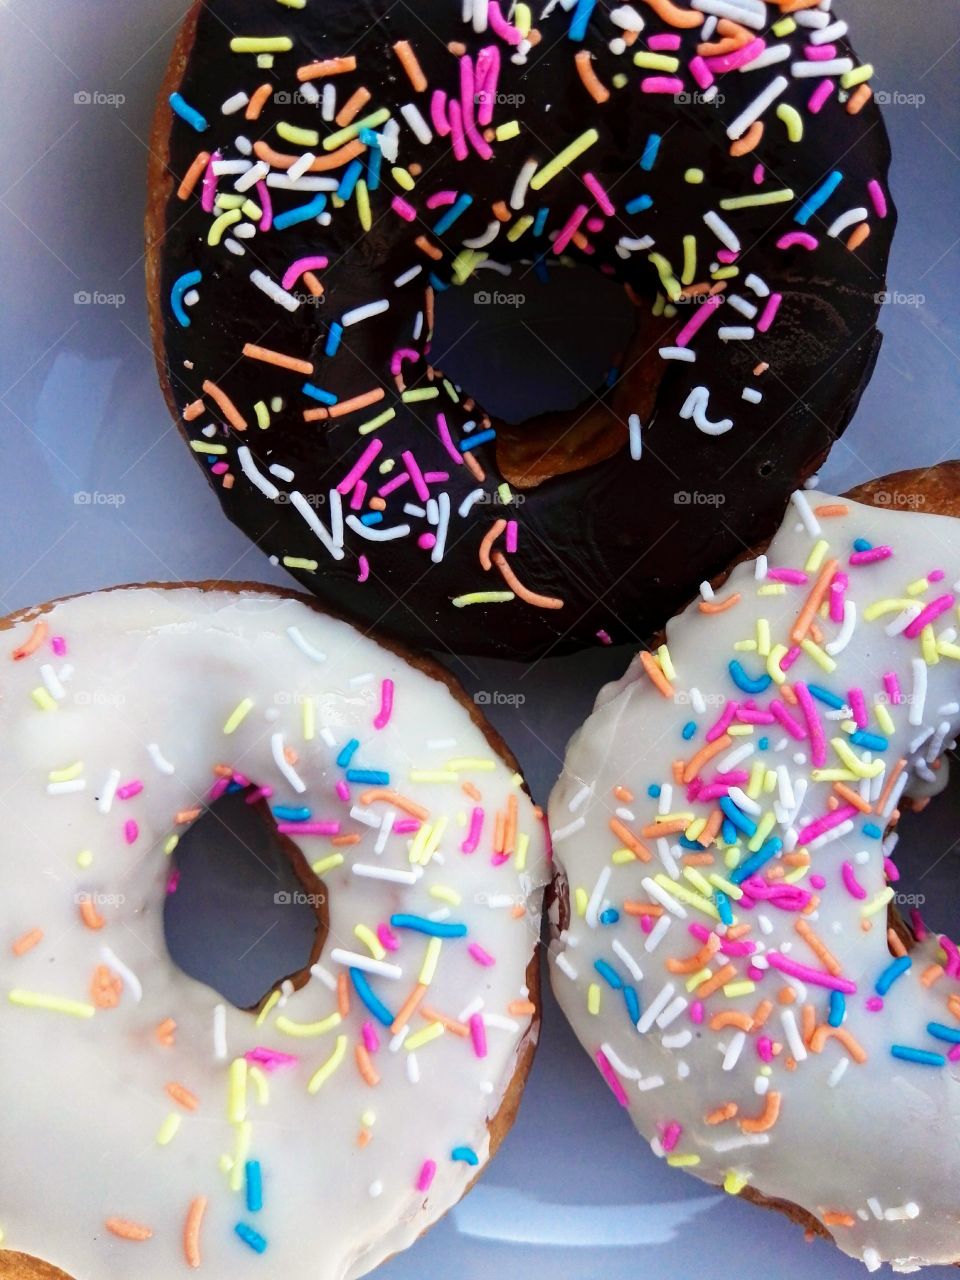 Life is better with doughnuts